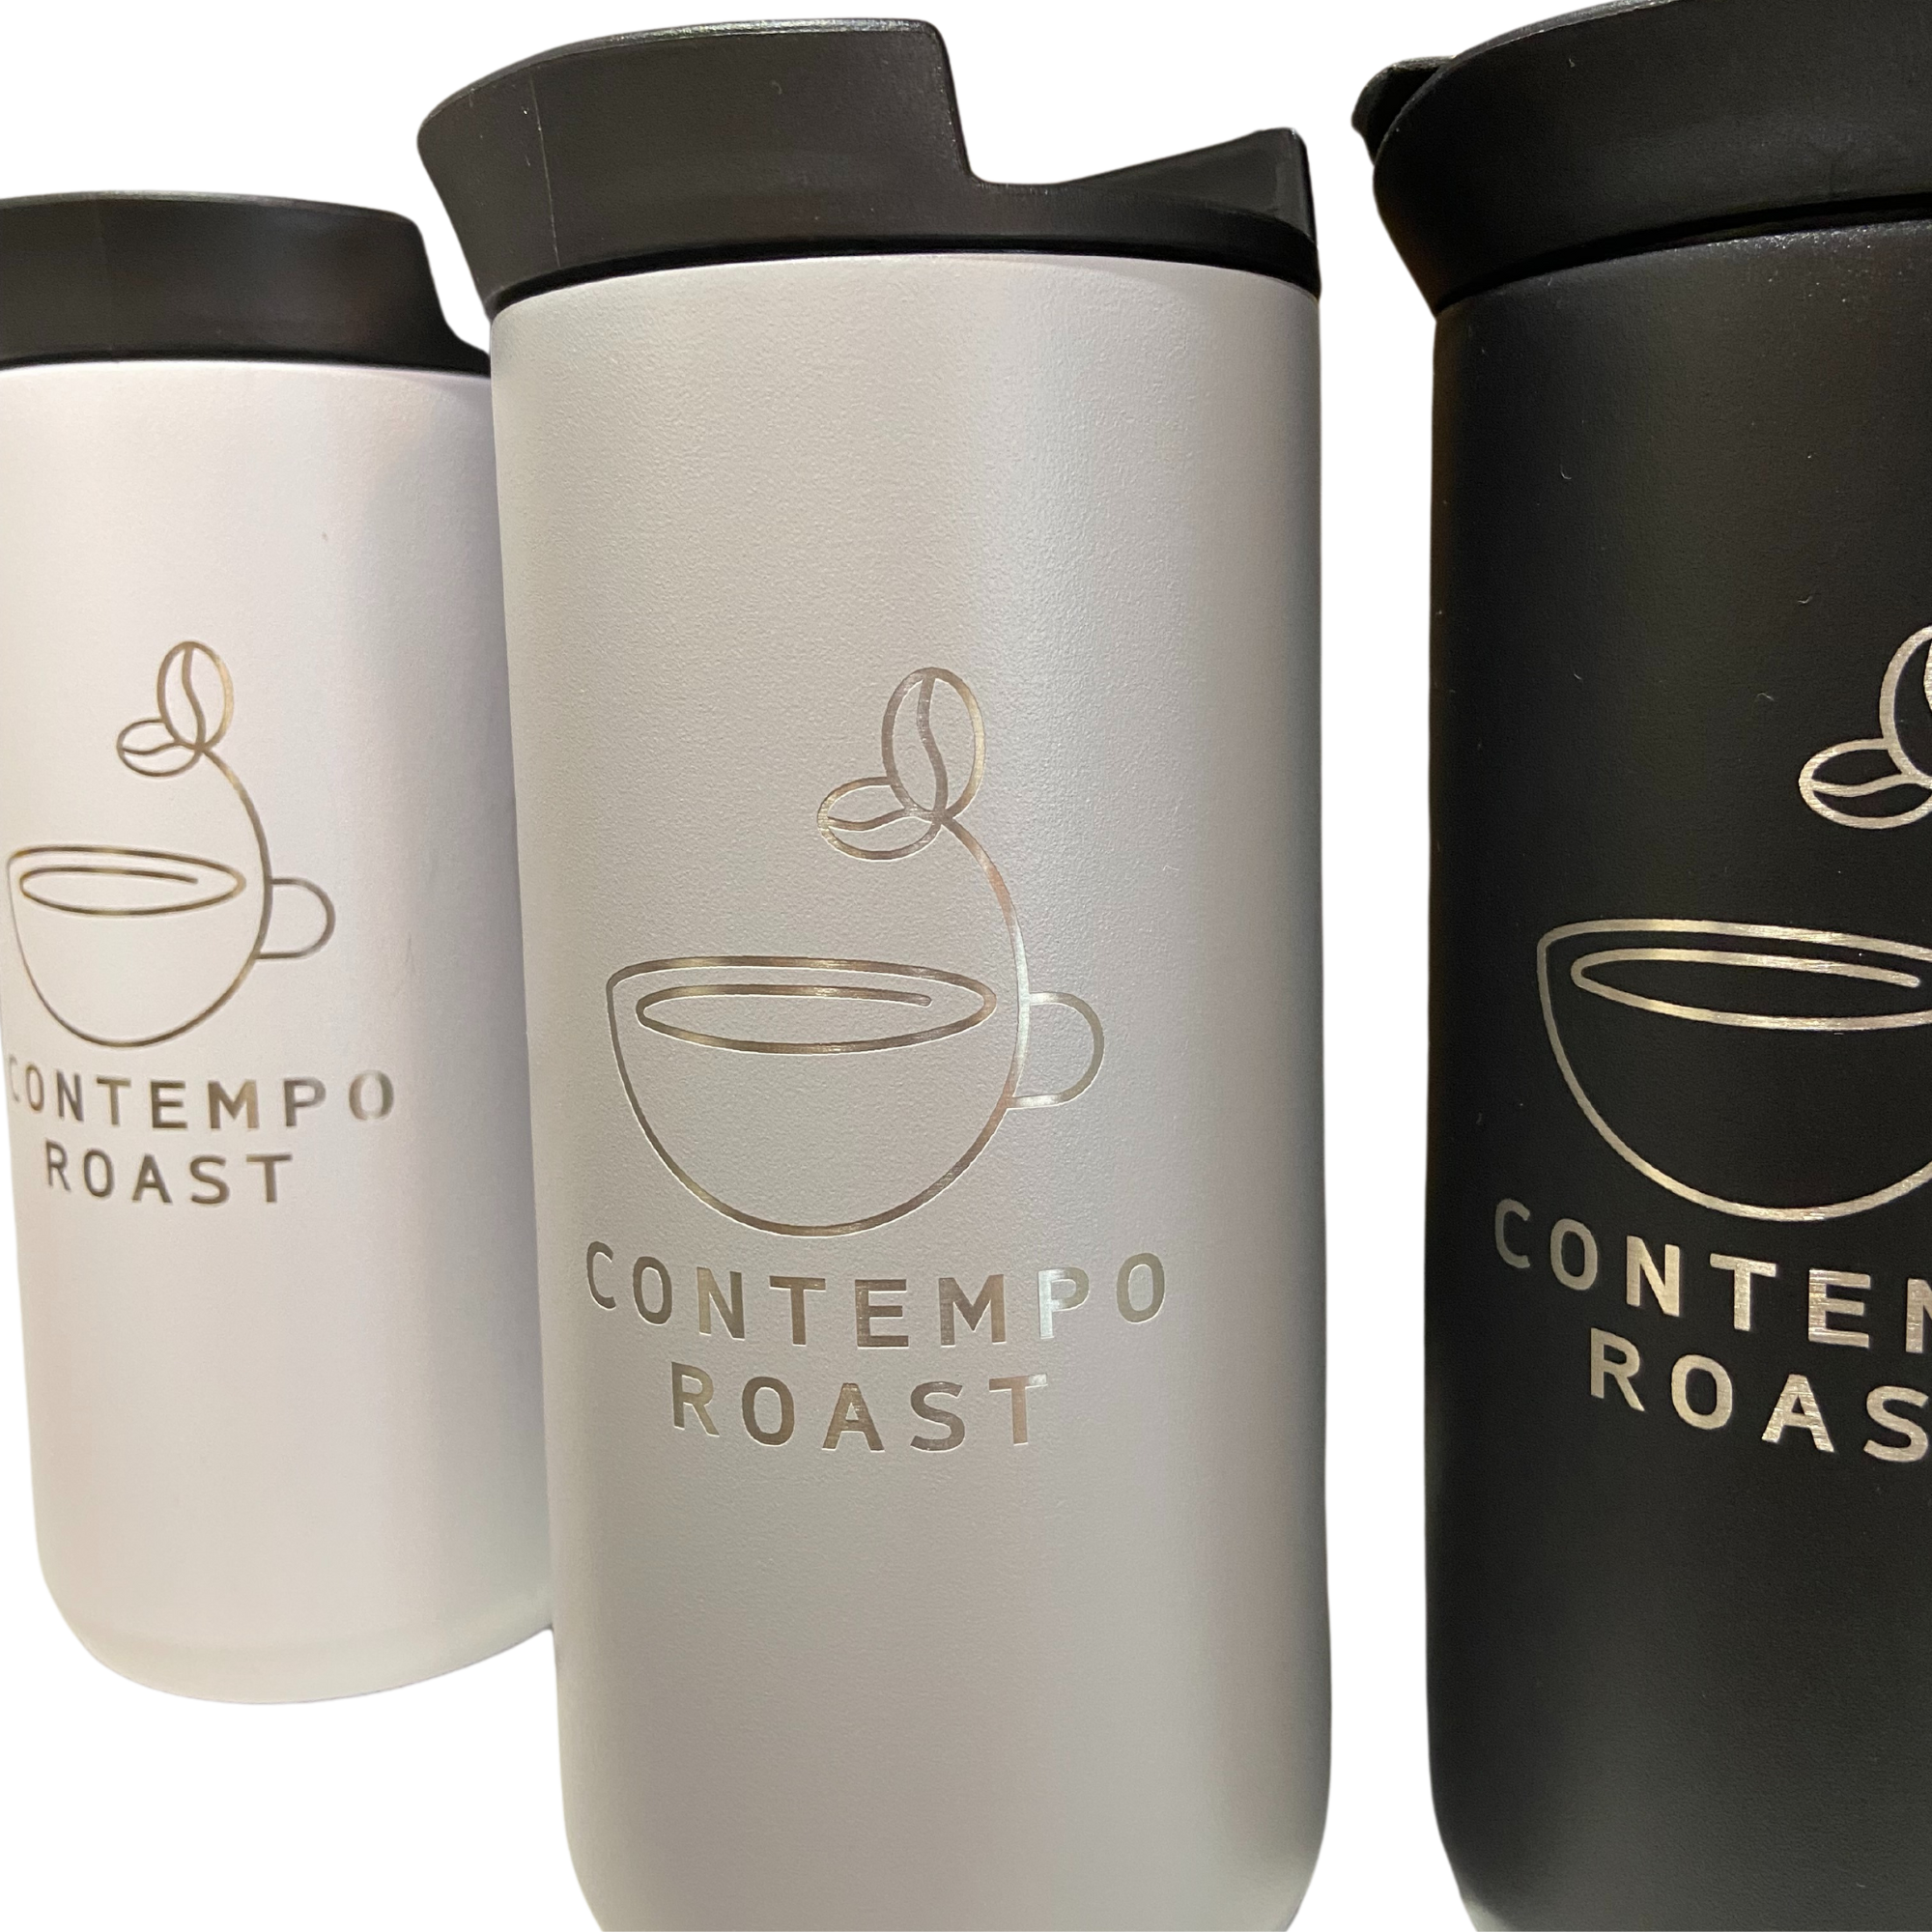 from left to right, a white, a grey and a black 12oz Minimalist Mug with etched ContempoRoast logos